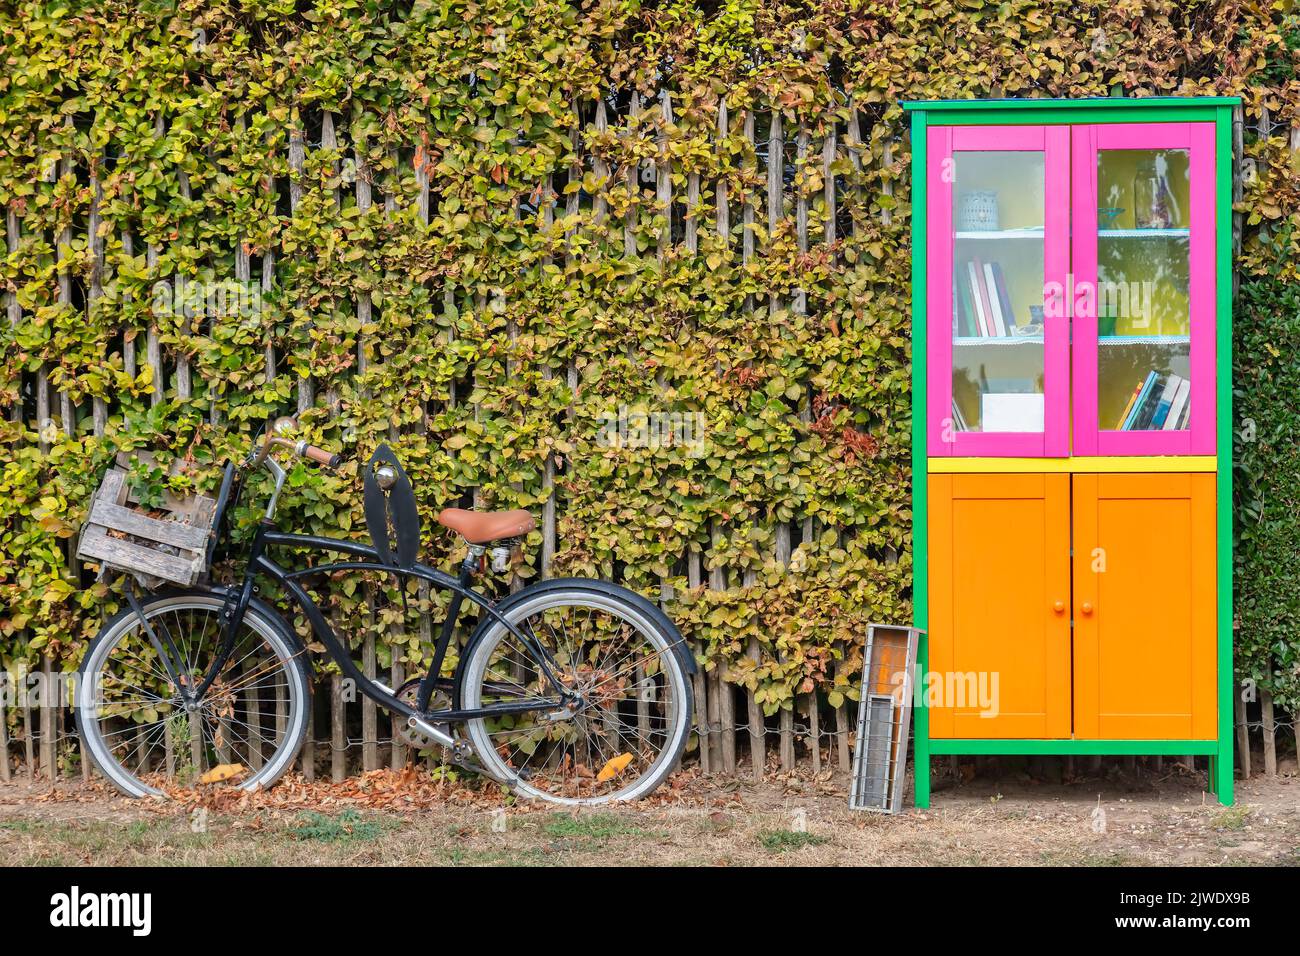 Dutch free mini public library with bicycle in autumn Stock Photo